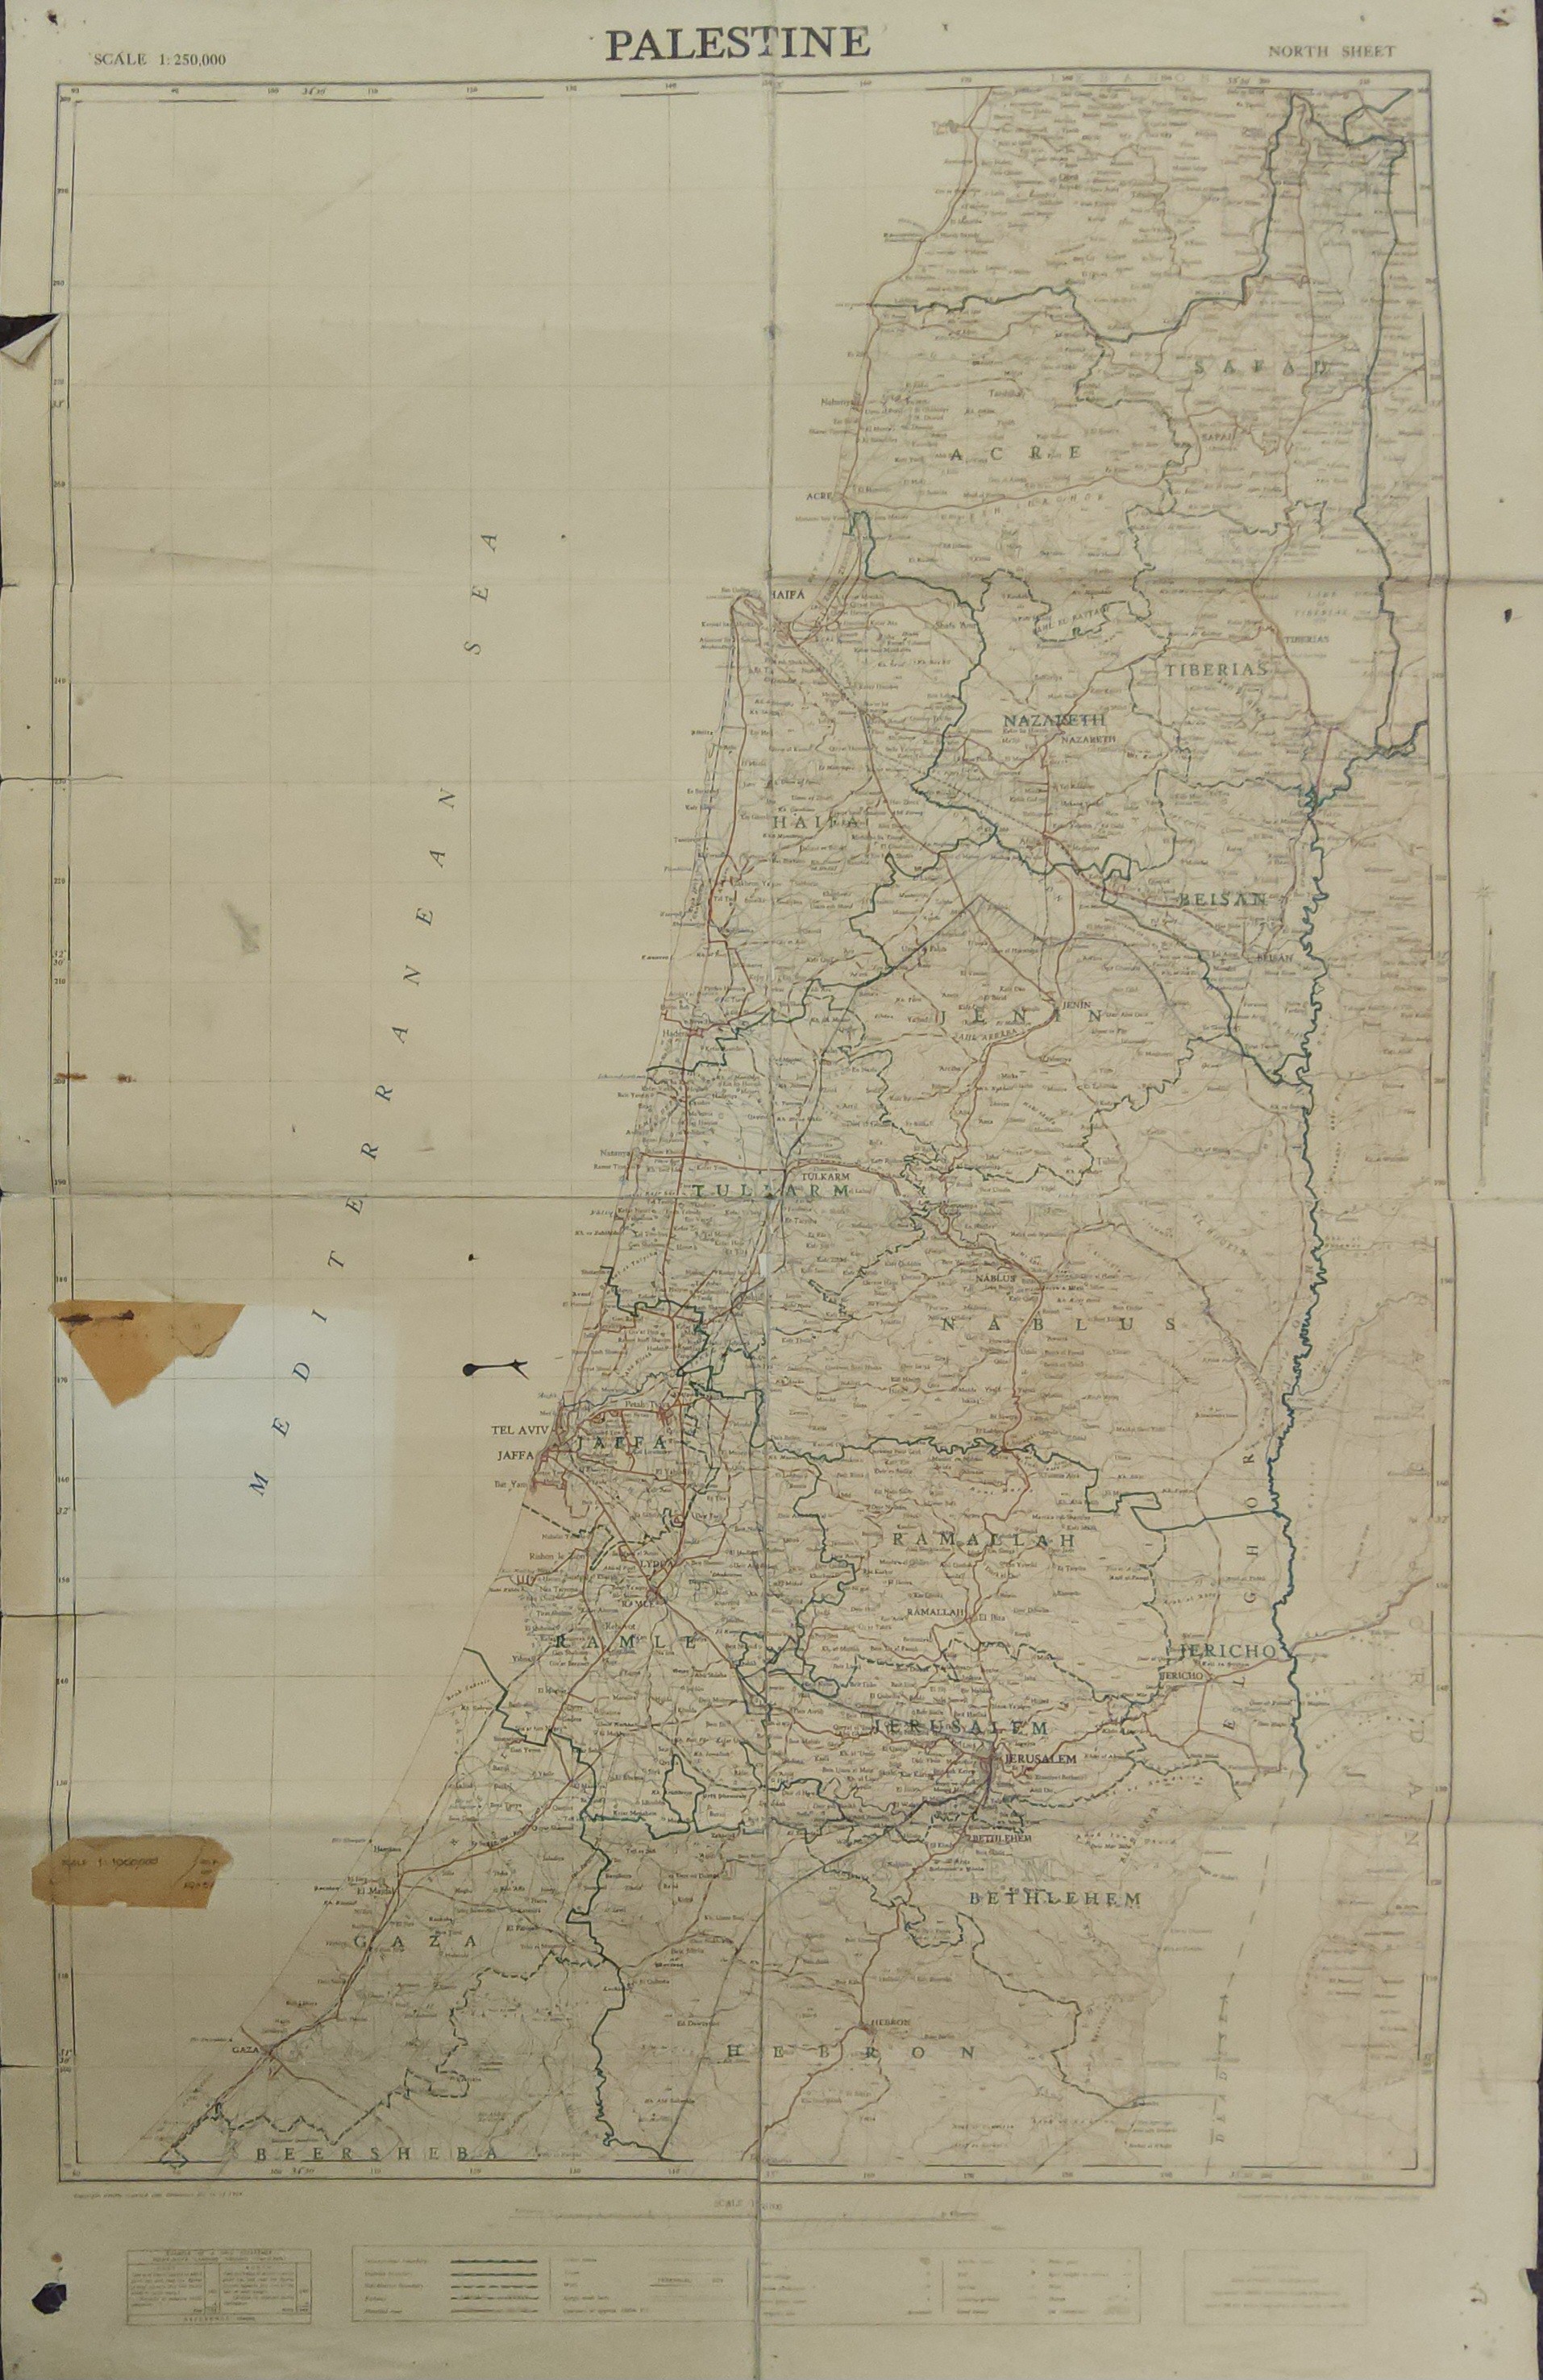 Cartography - Palestine Land Values, A.D. Hirings - H.Q. - Palestine 1: 100,000, compiled, drawn and - Image 4 of 4